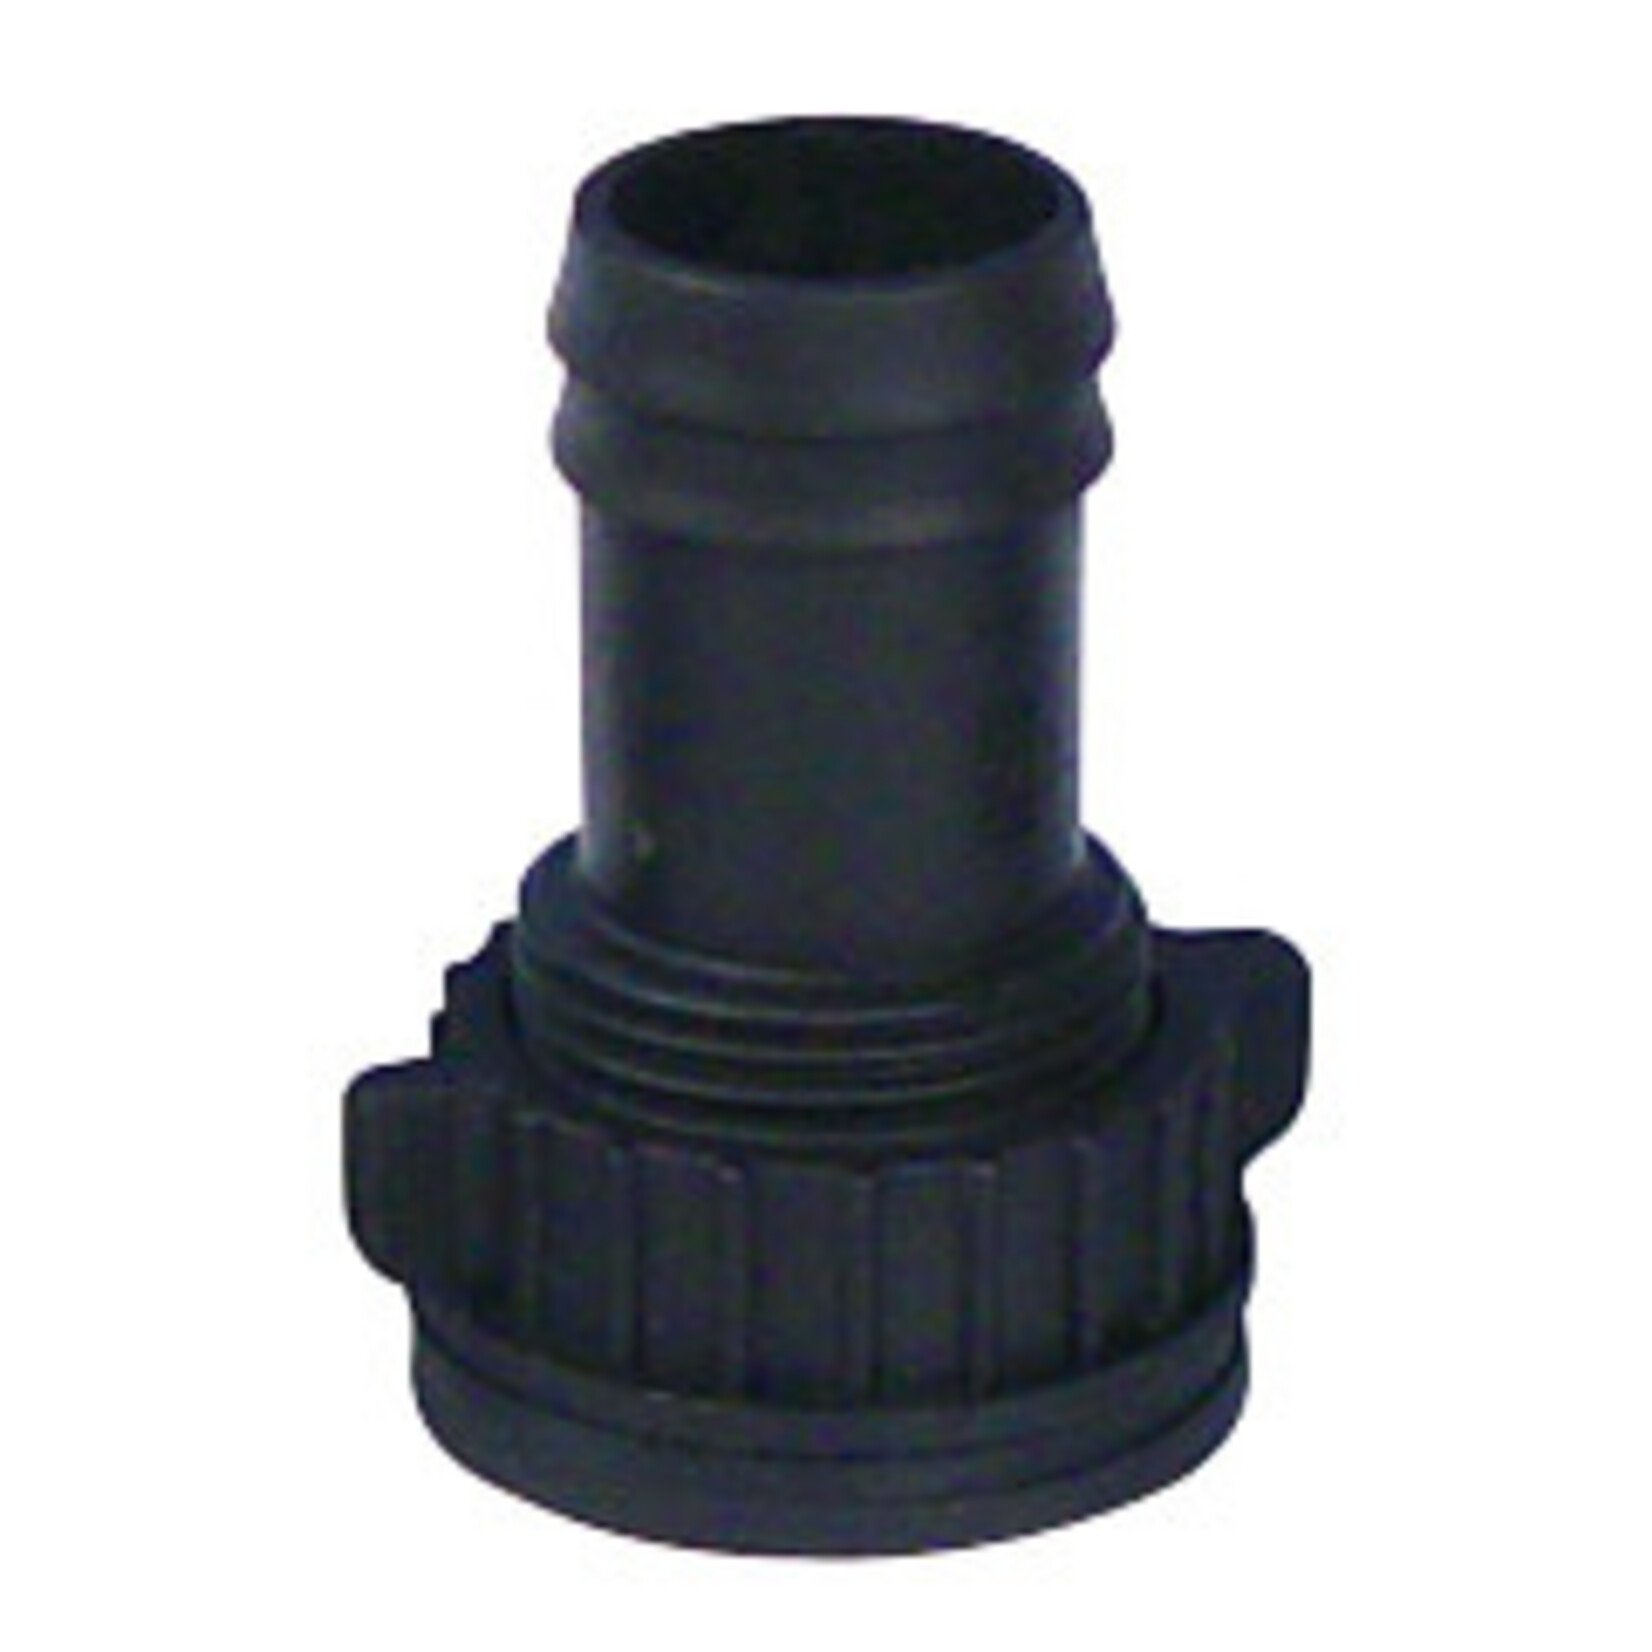 Hydro Flow Ebb & Flow Tub Outlet Fitting 1 in (25mm)